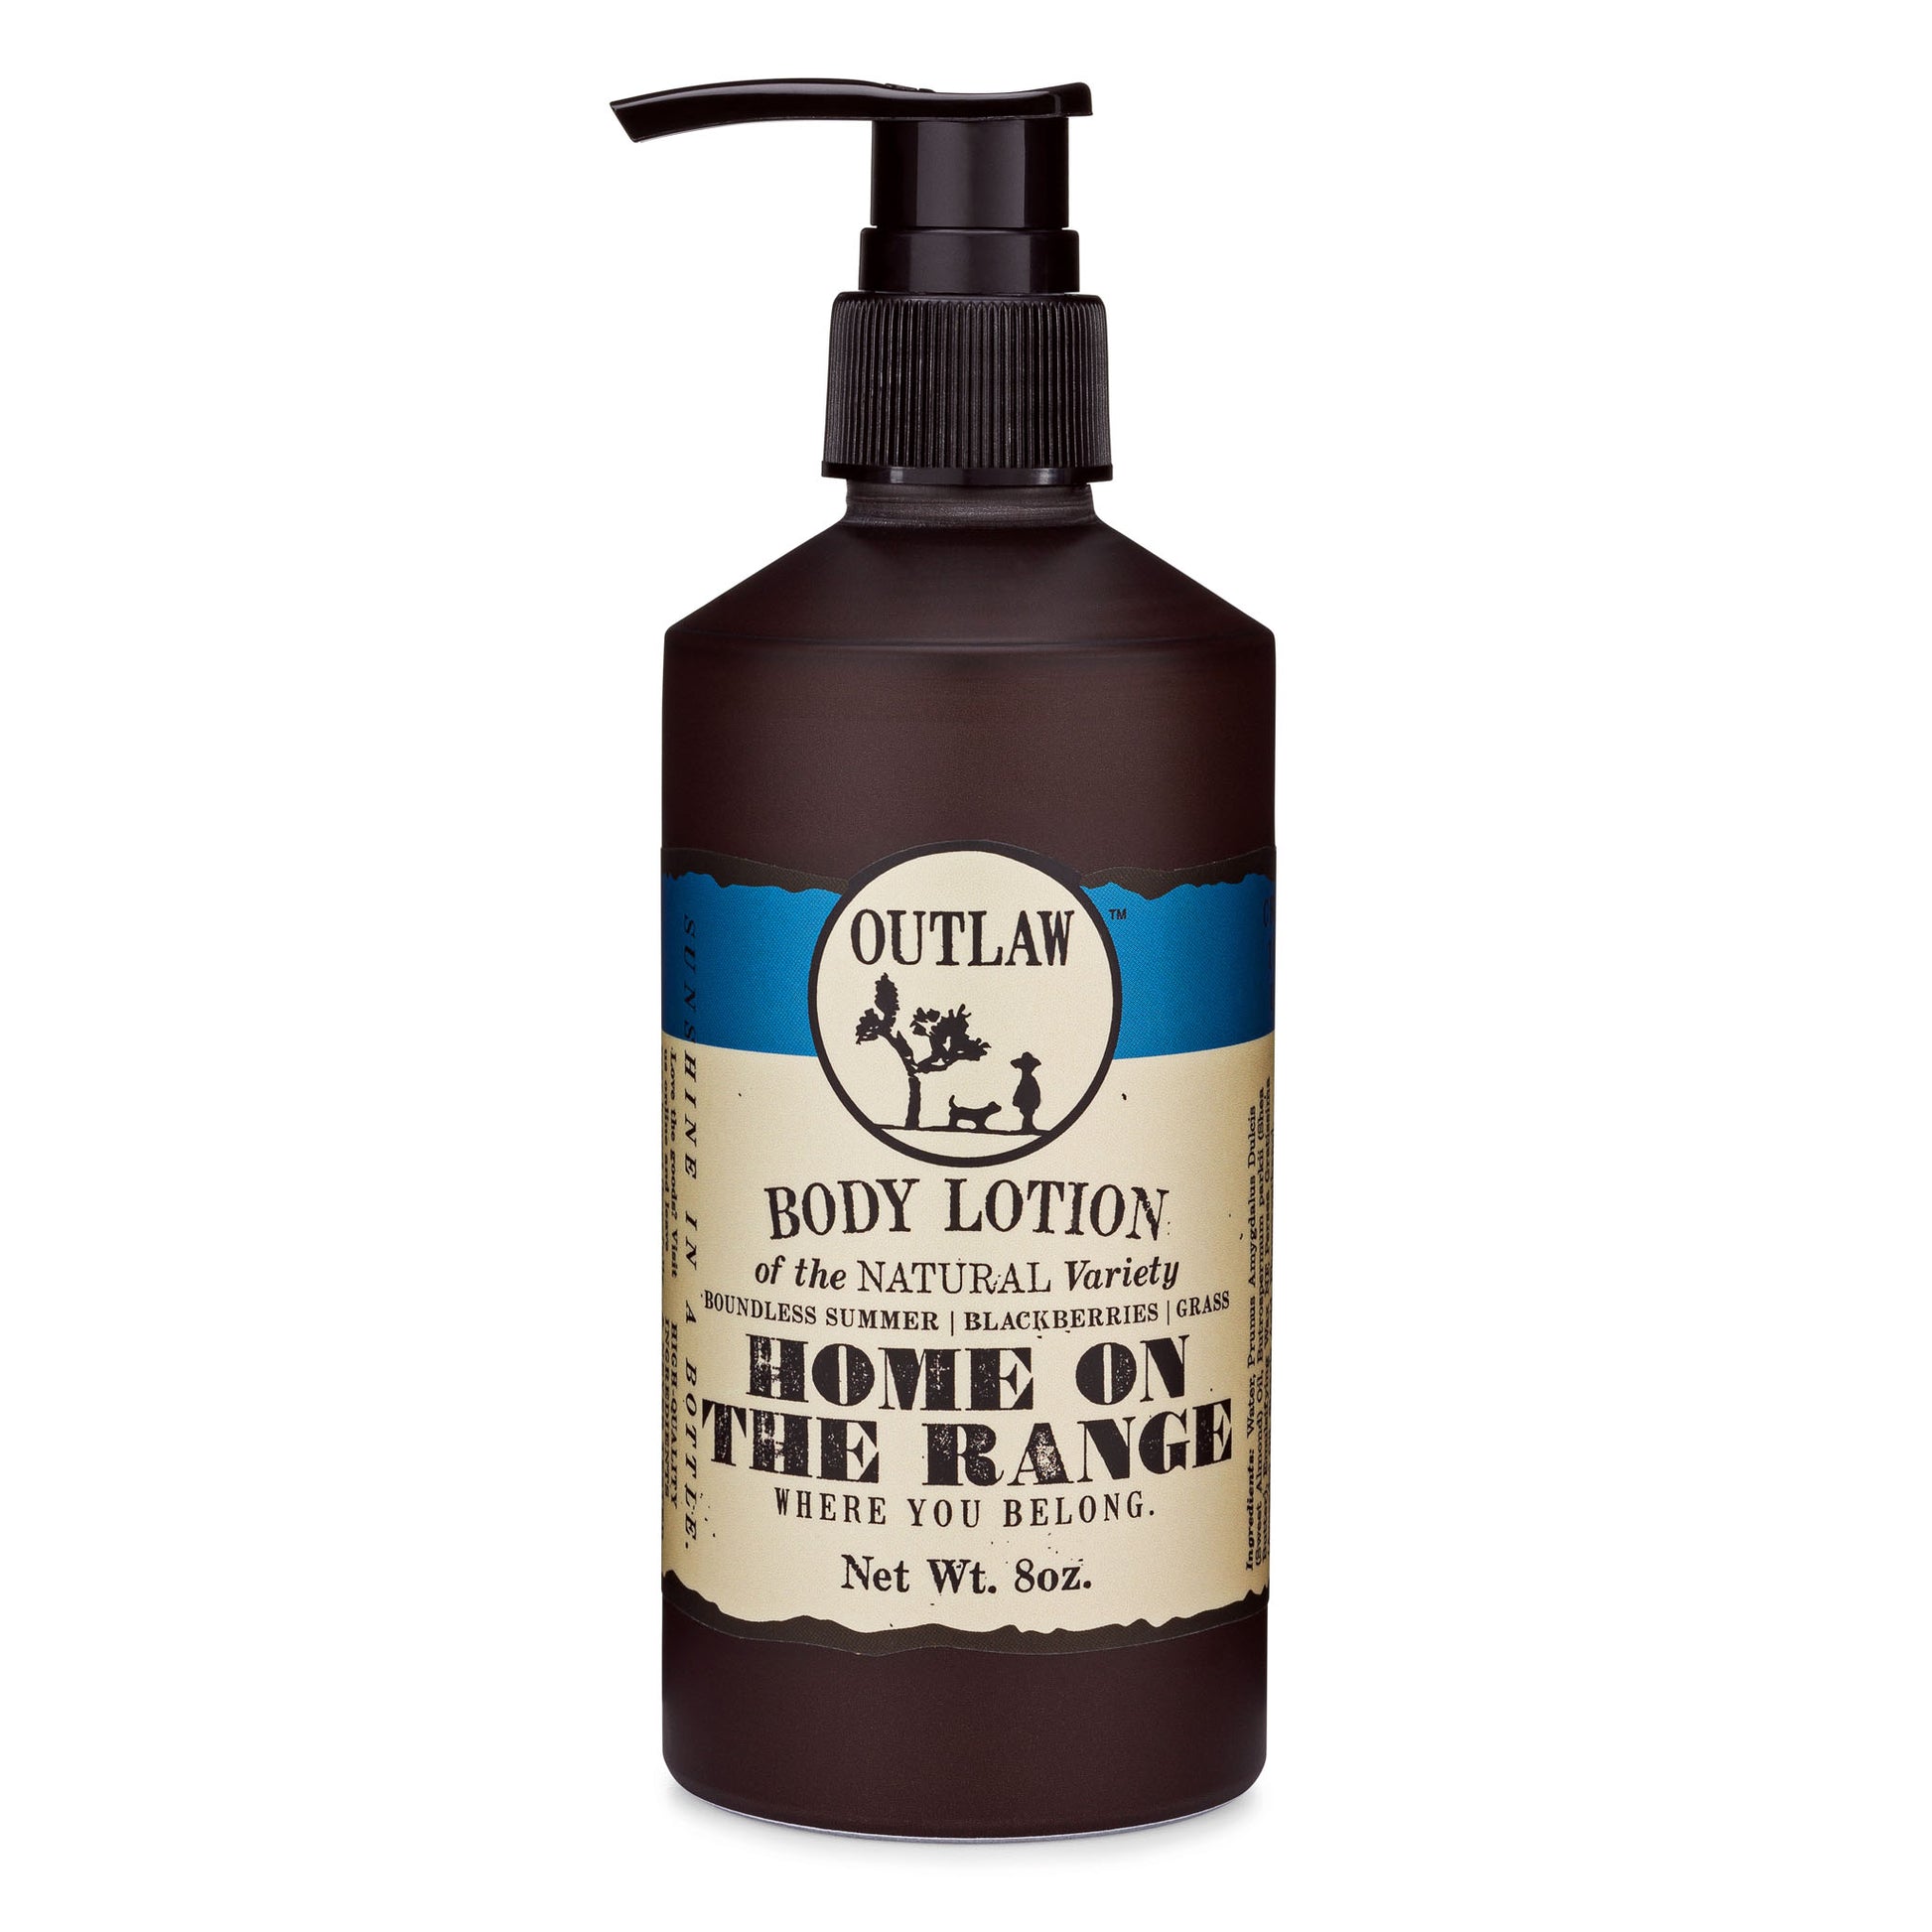 Natural body lotion with Home on the Range berry and laundry scent by Outlaw